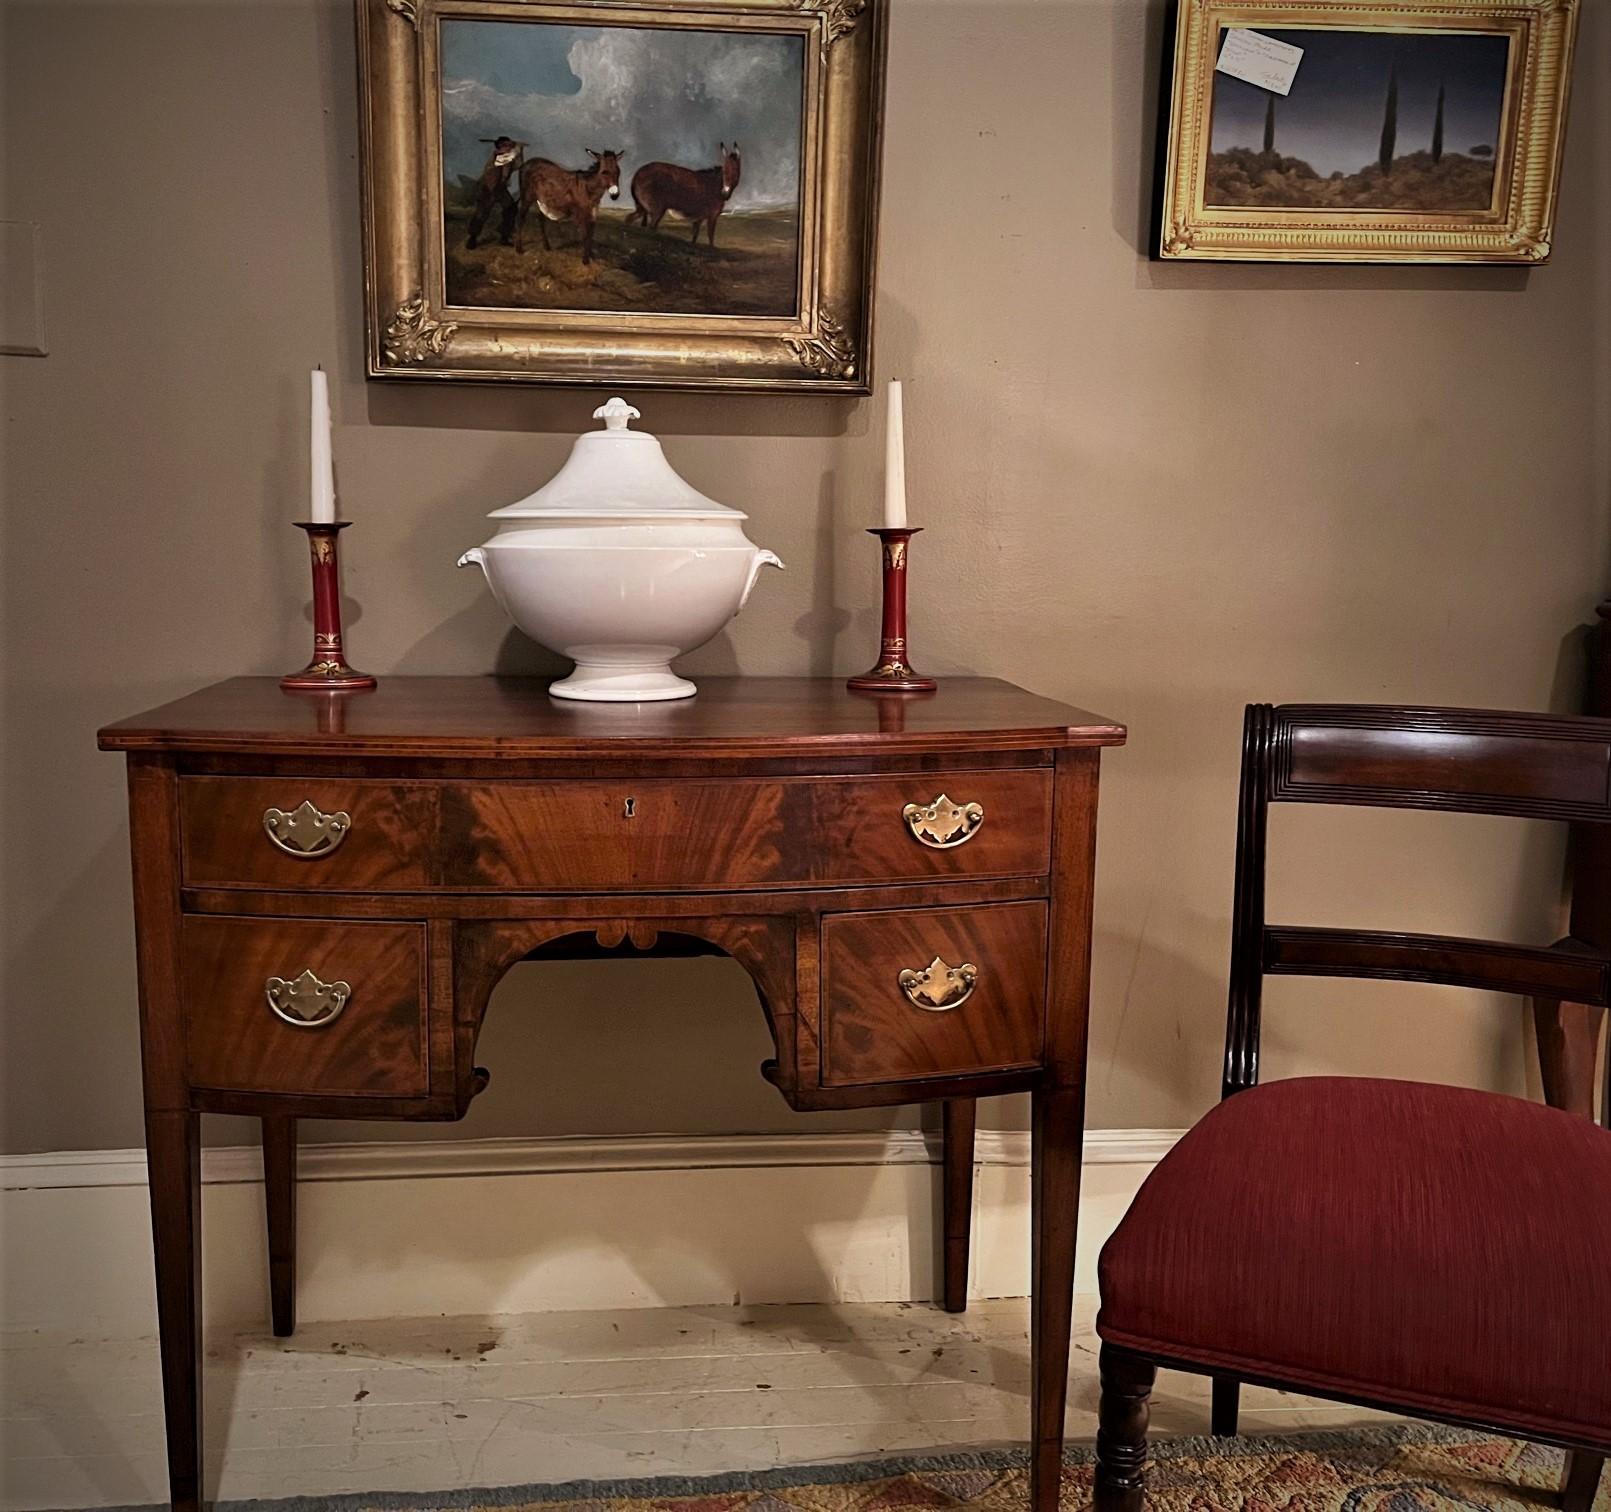 This beautiful petite sideboard/console has many uses: perfect as a console in the foyer or living room, equally great as a server in the breakfast room or dining room. The piece was bench made by a highly-skilled cabinet maker copying the Federal